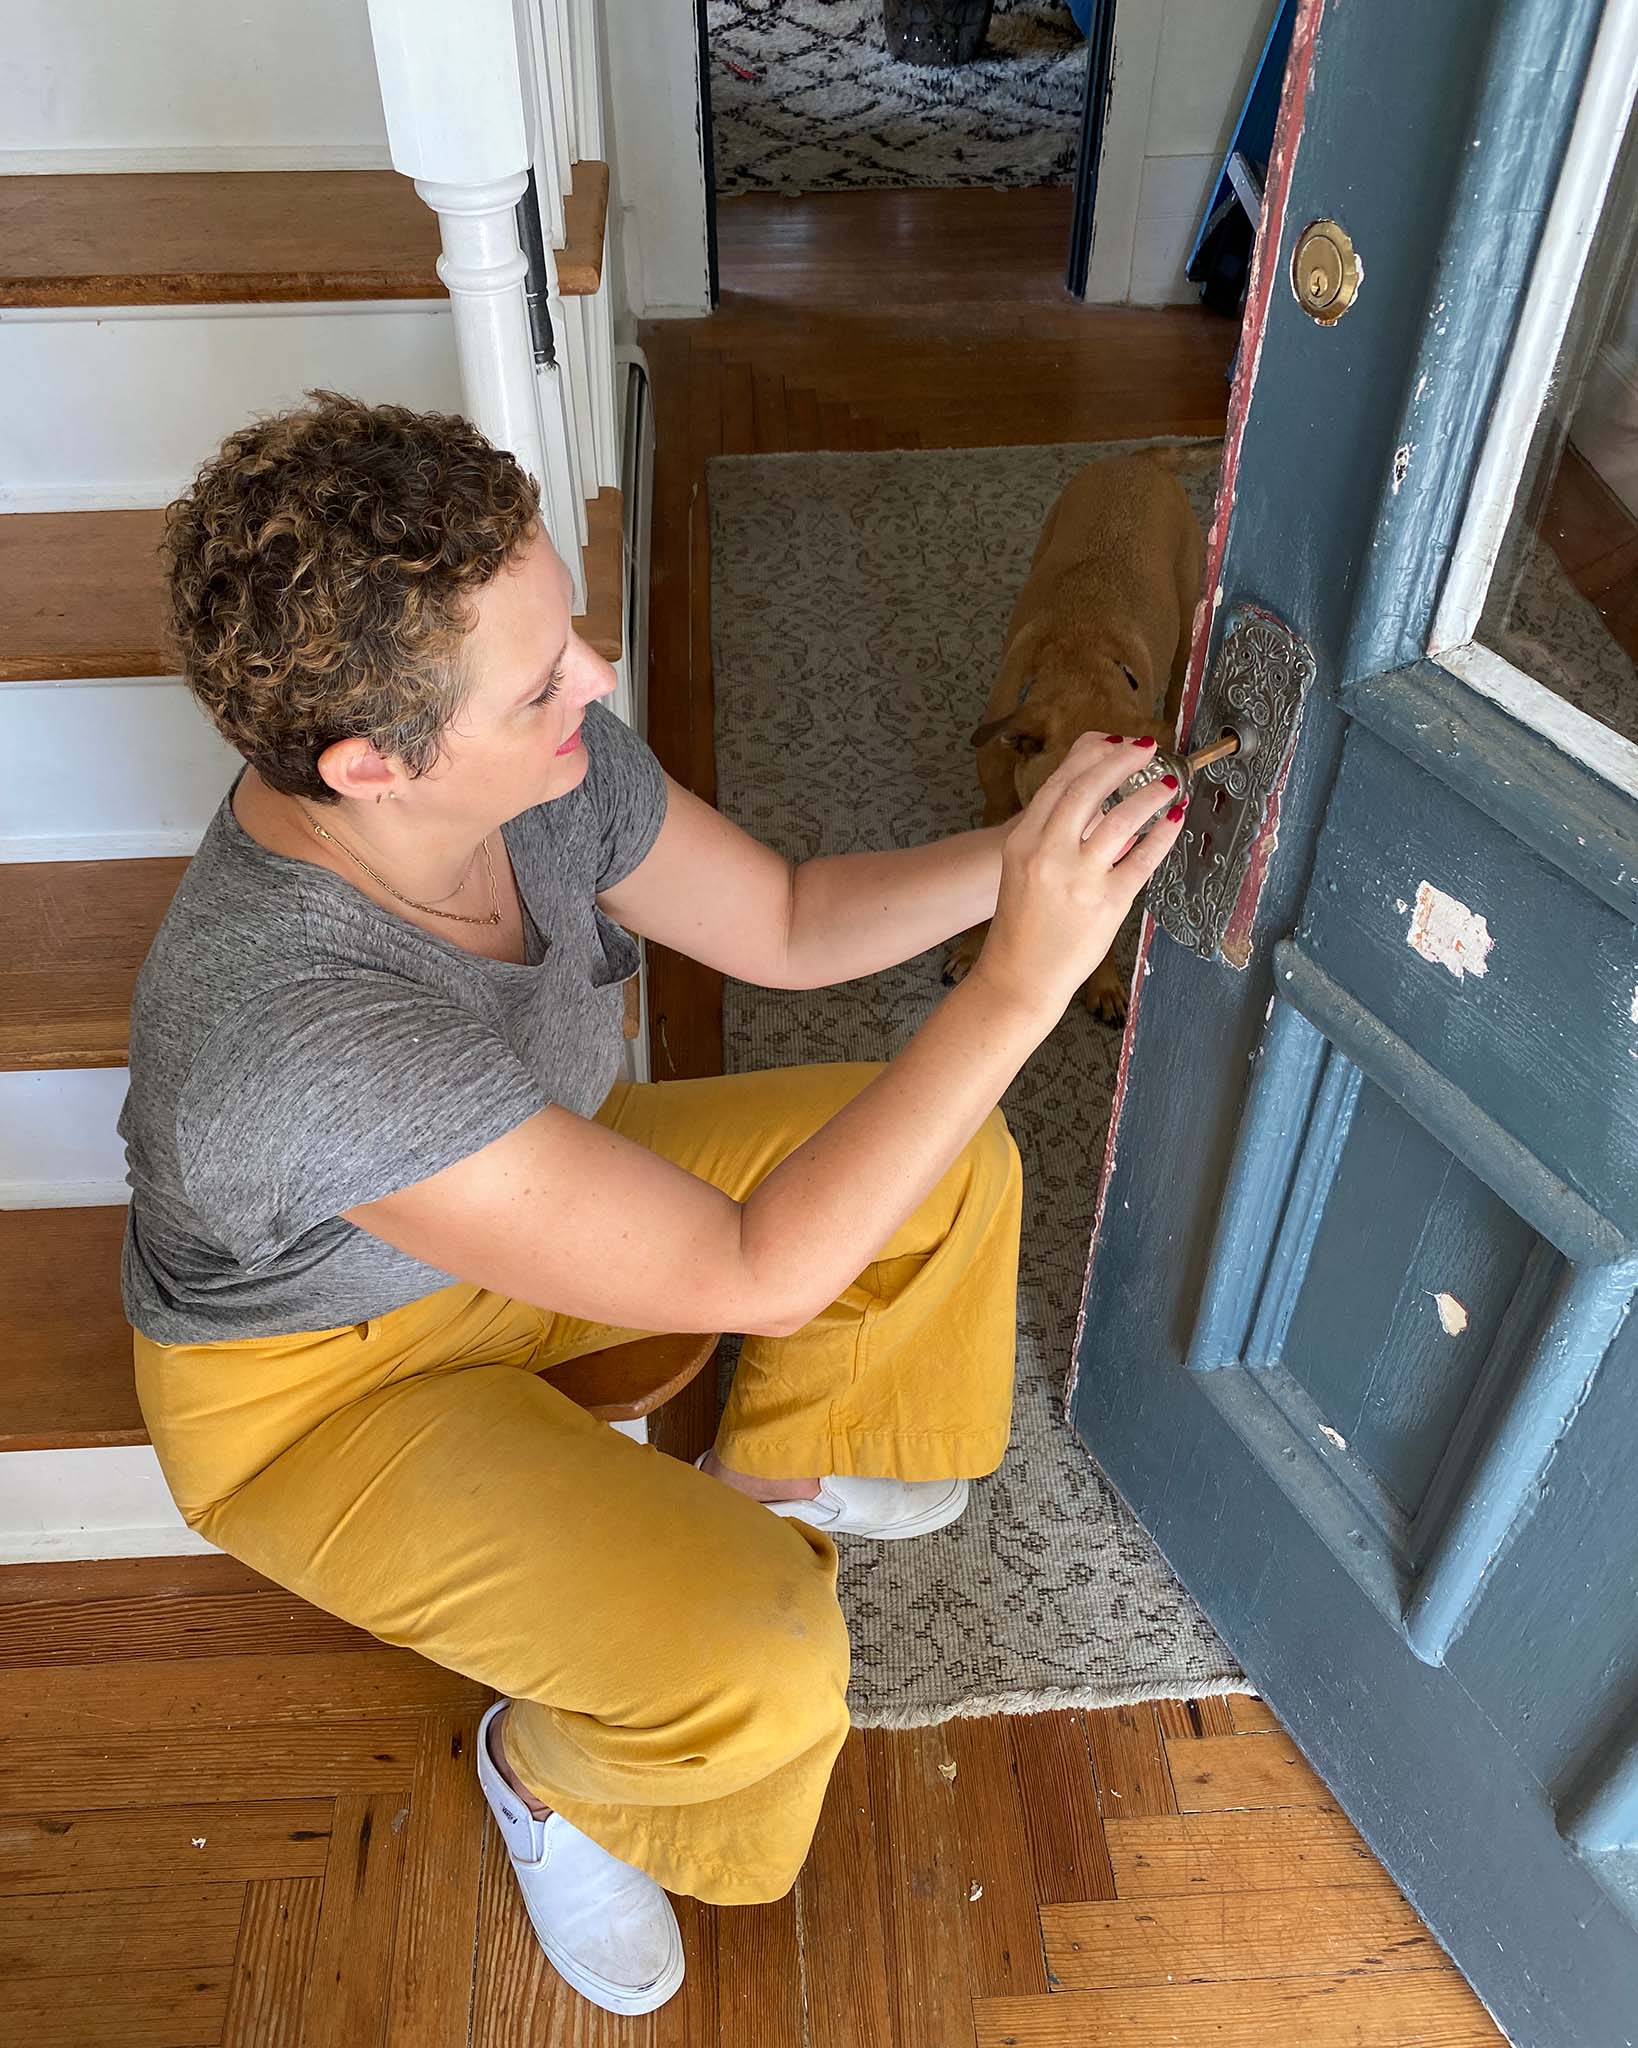 How to paint a front door: Removing door hardware and prepping a front door for painting.